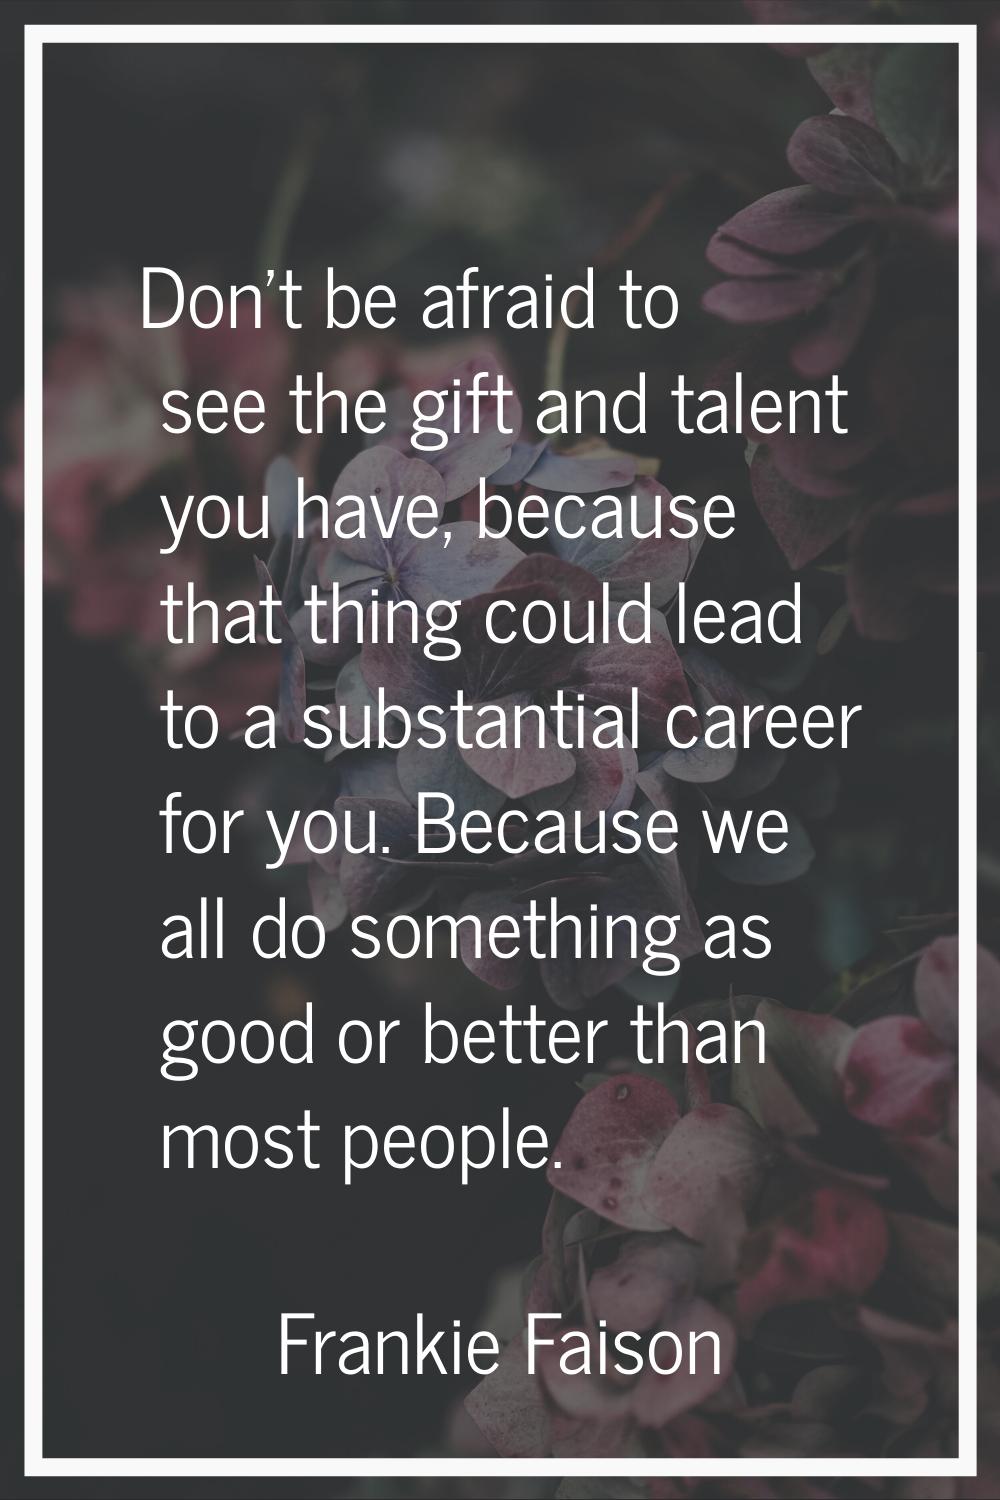 Don't be afraid to see the gift and talent you have, because that thing could lead to a substantial